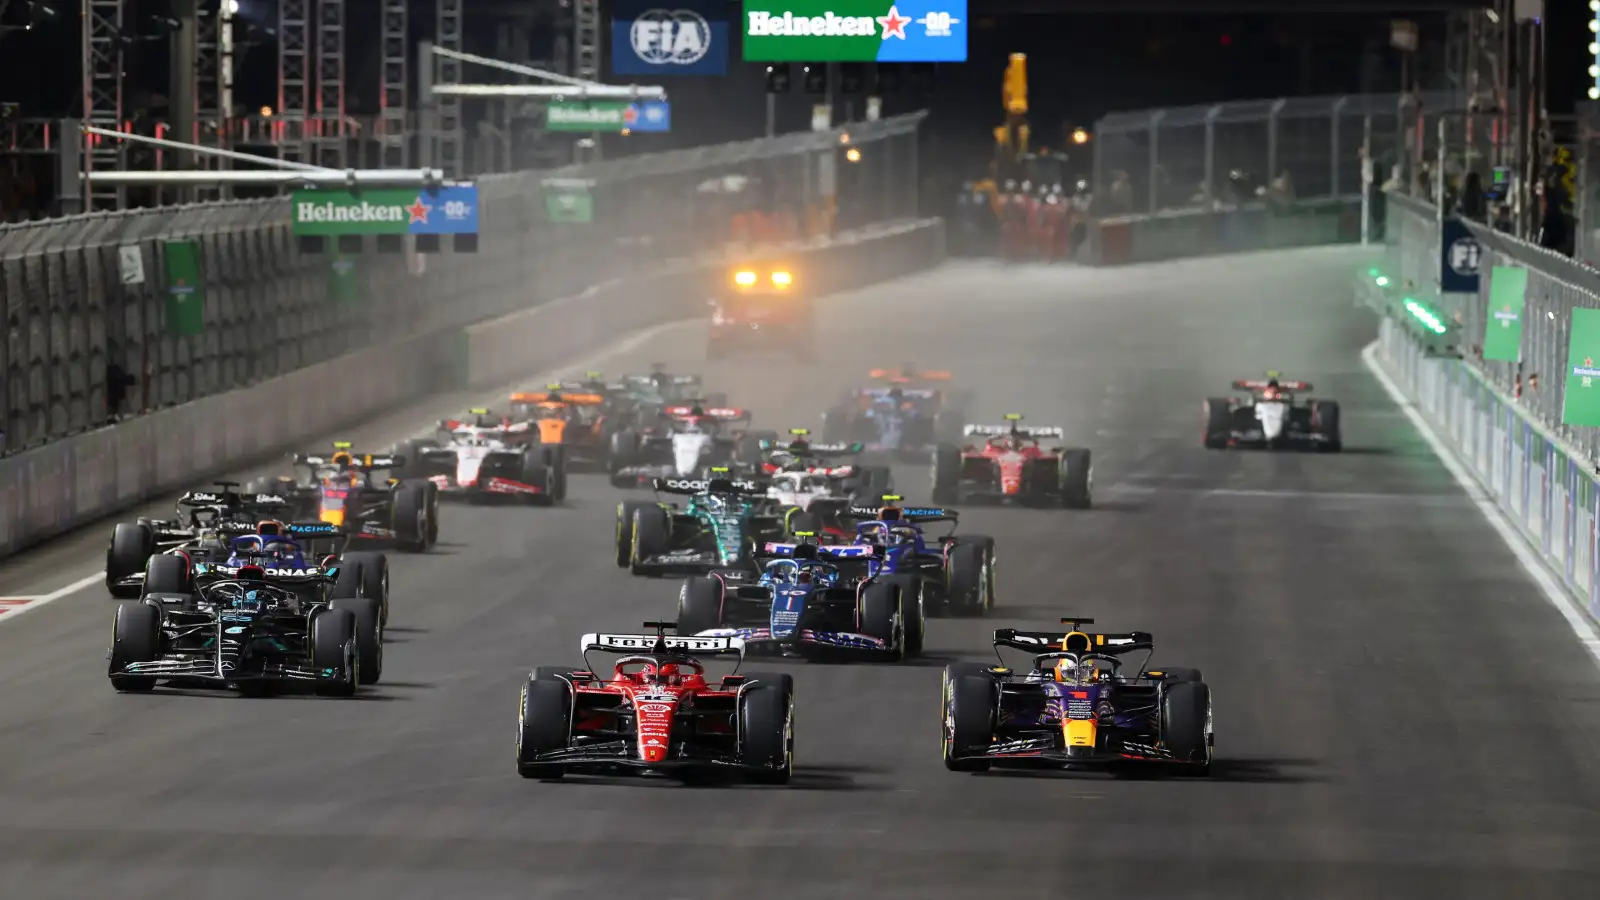 Max Verstappen and Charles Leclerc battle into Turn 1 at the Las Vegas Grand Prix.